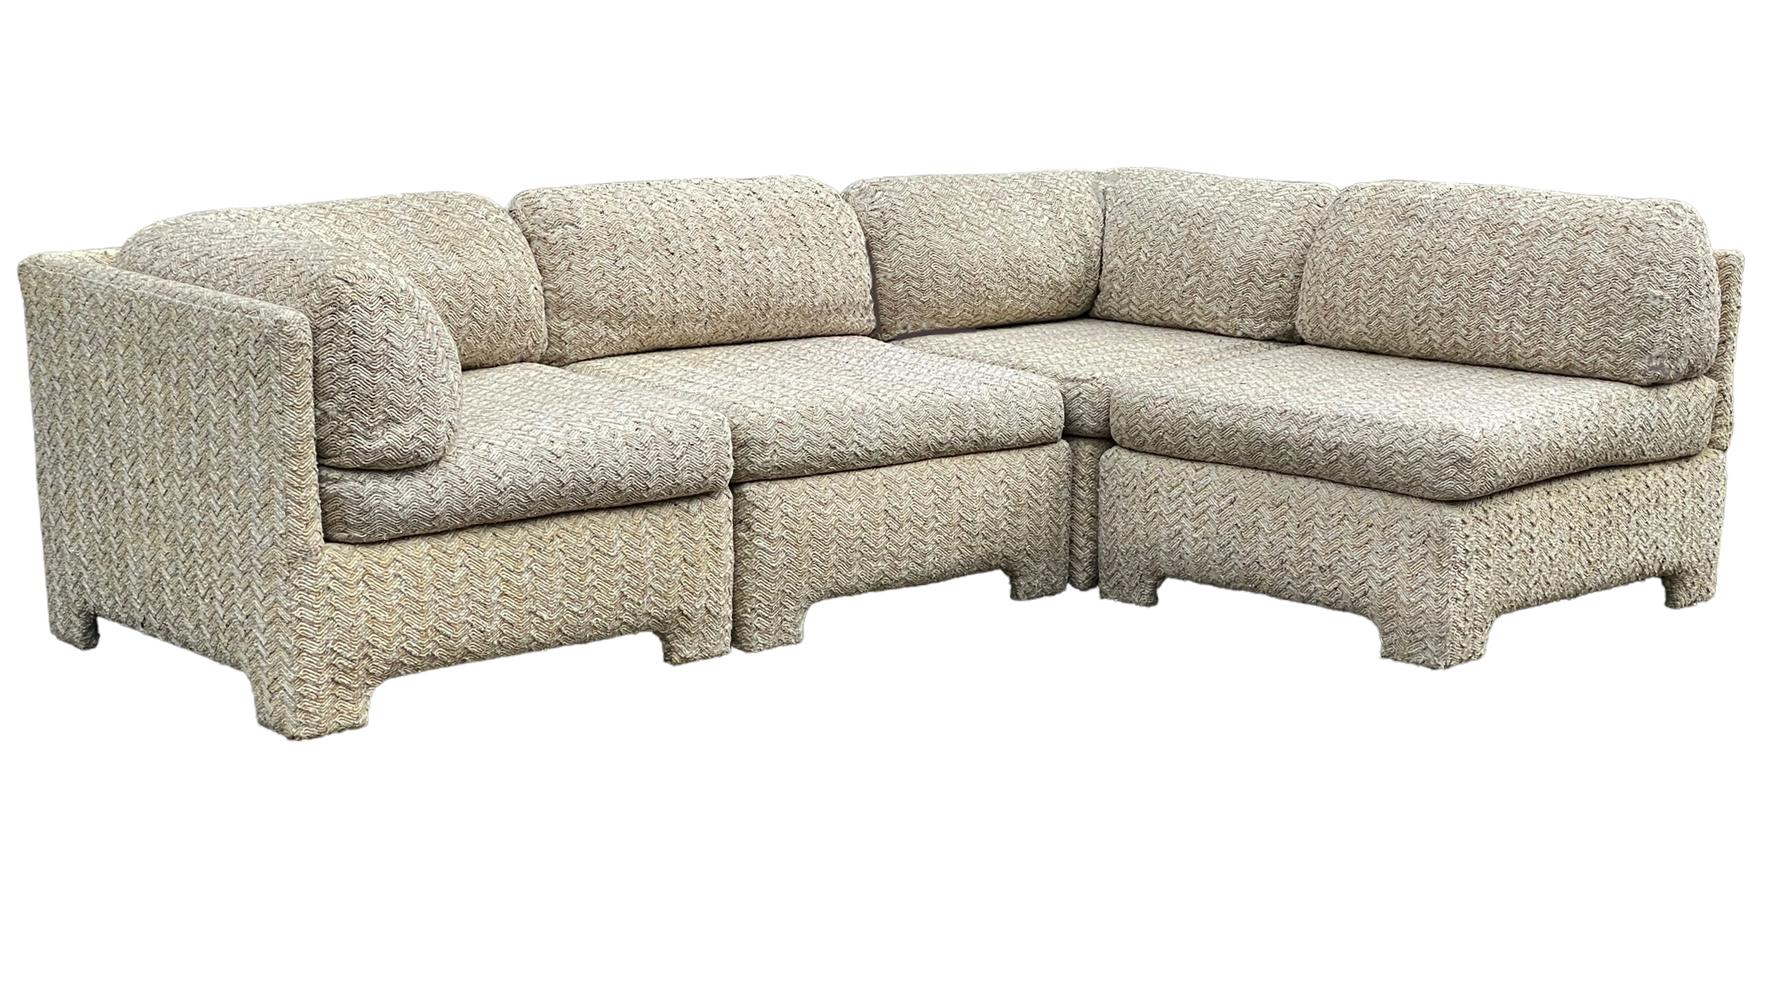 Small Scale Mid Century Modern Boxy Modular Parsons Style L Shaped Sofa  For Sale 2